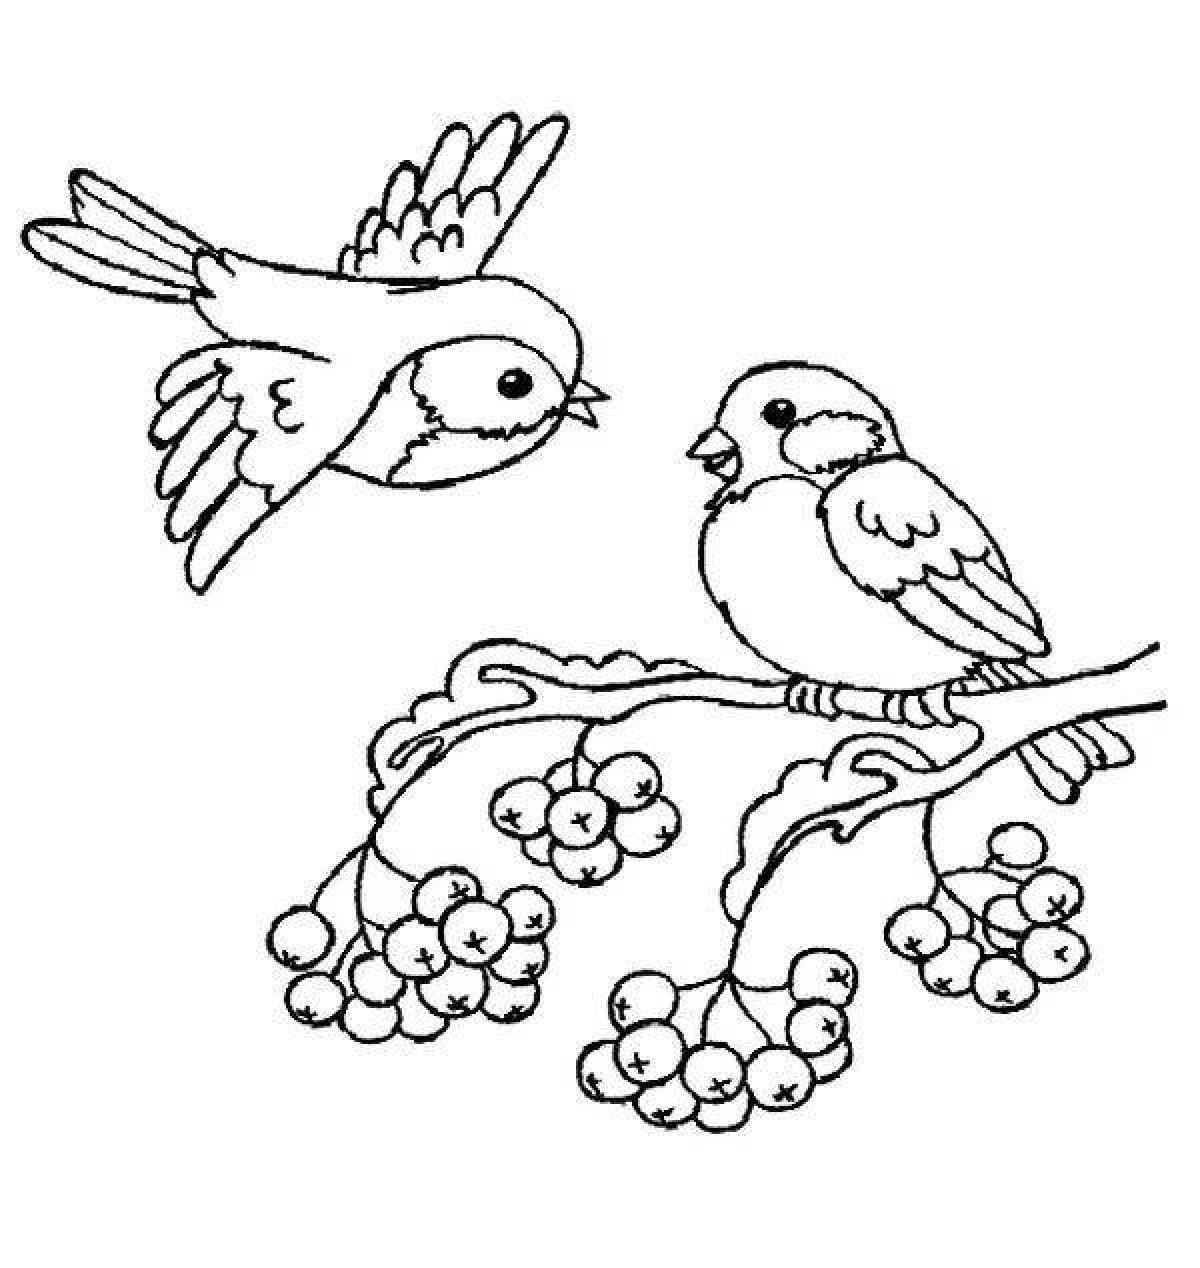 Fancy winter birds coloring pages for kids